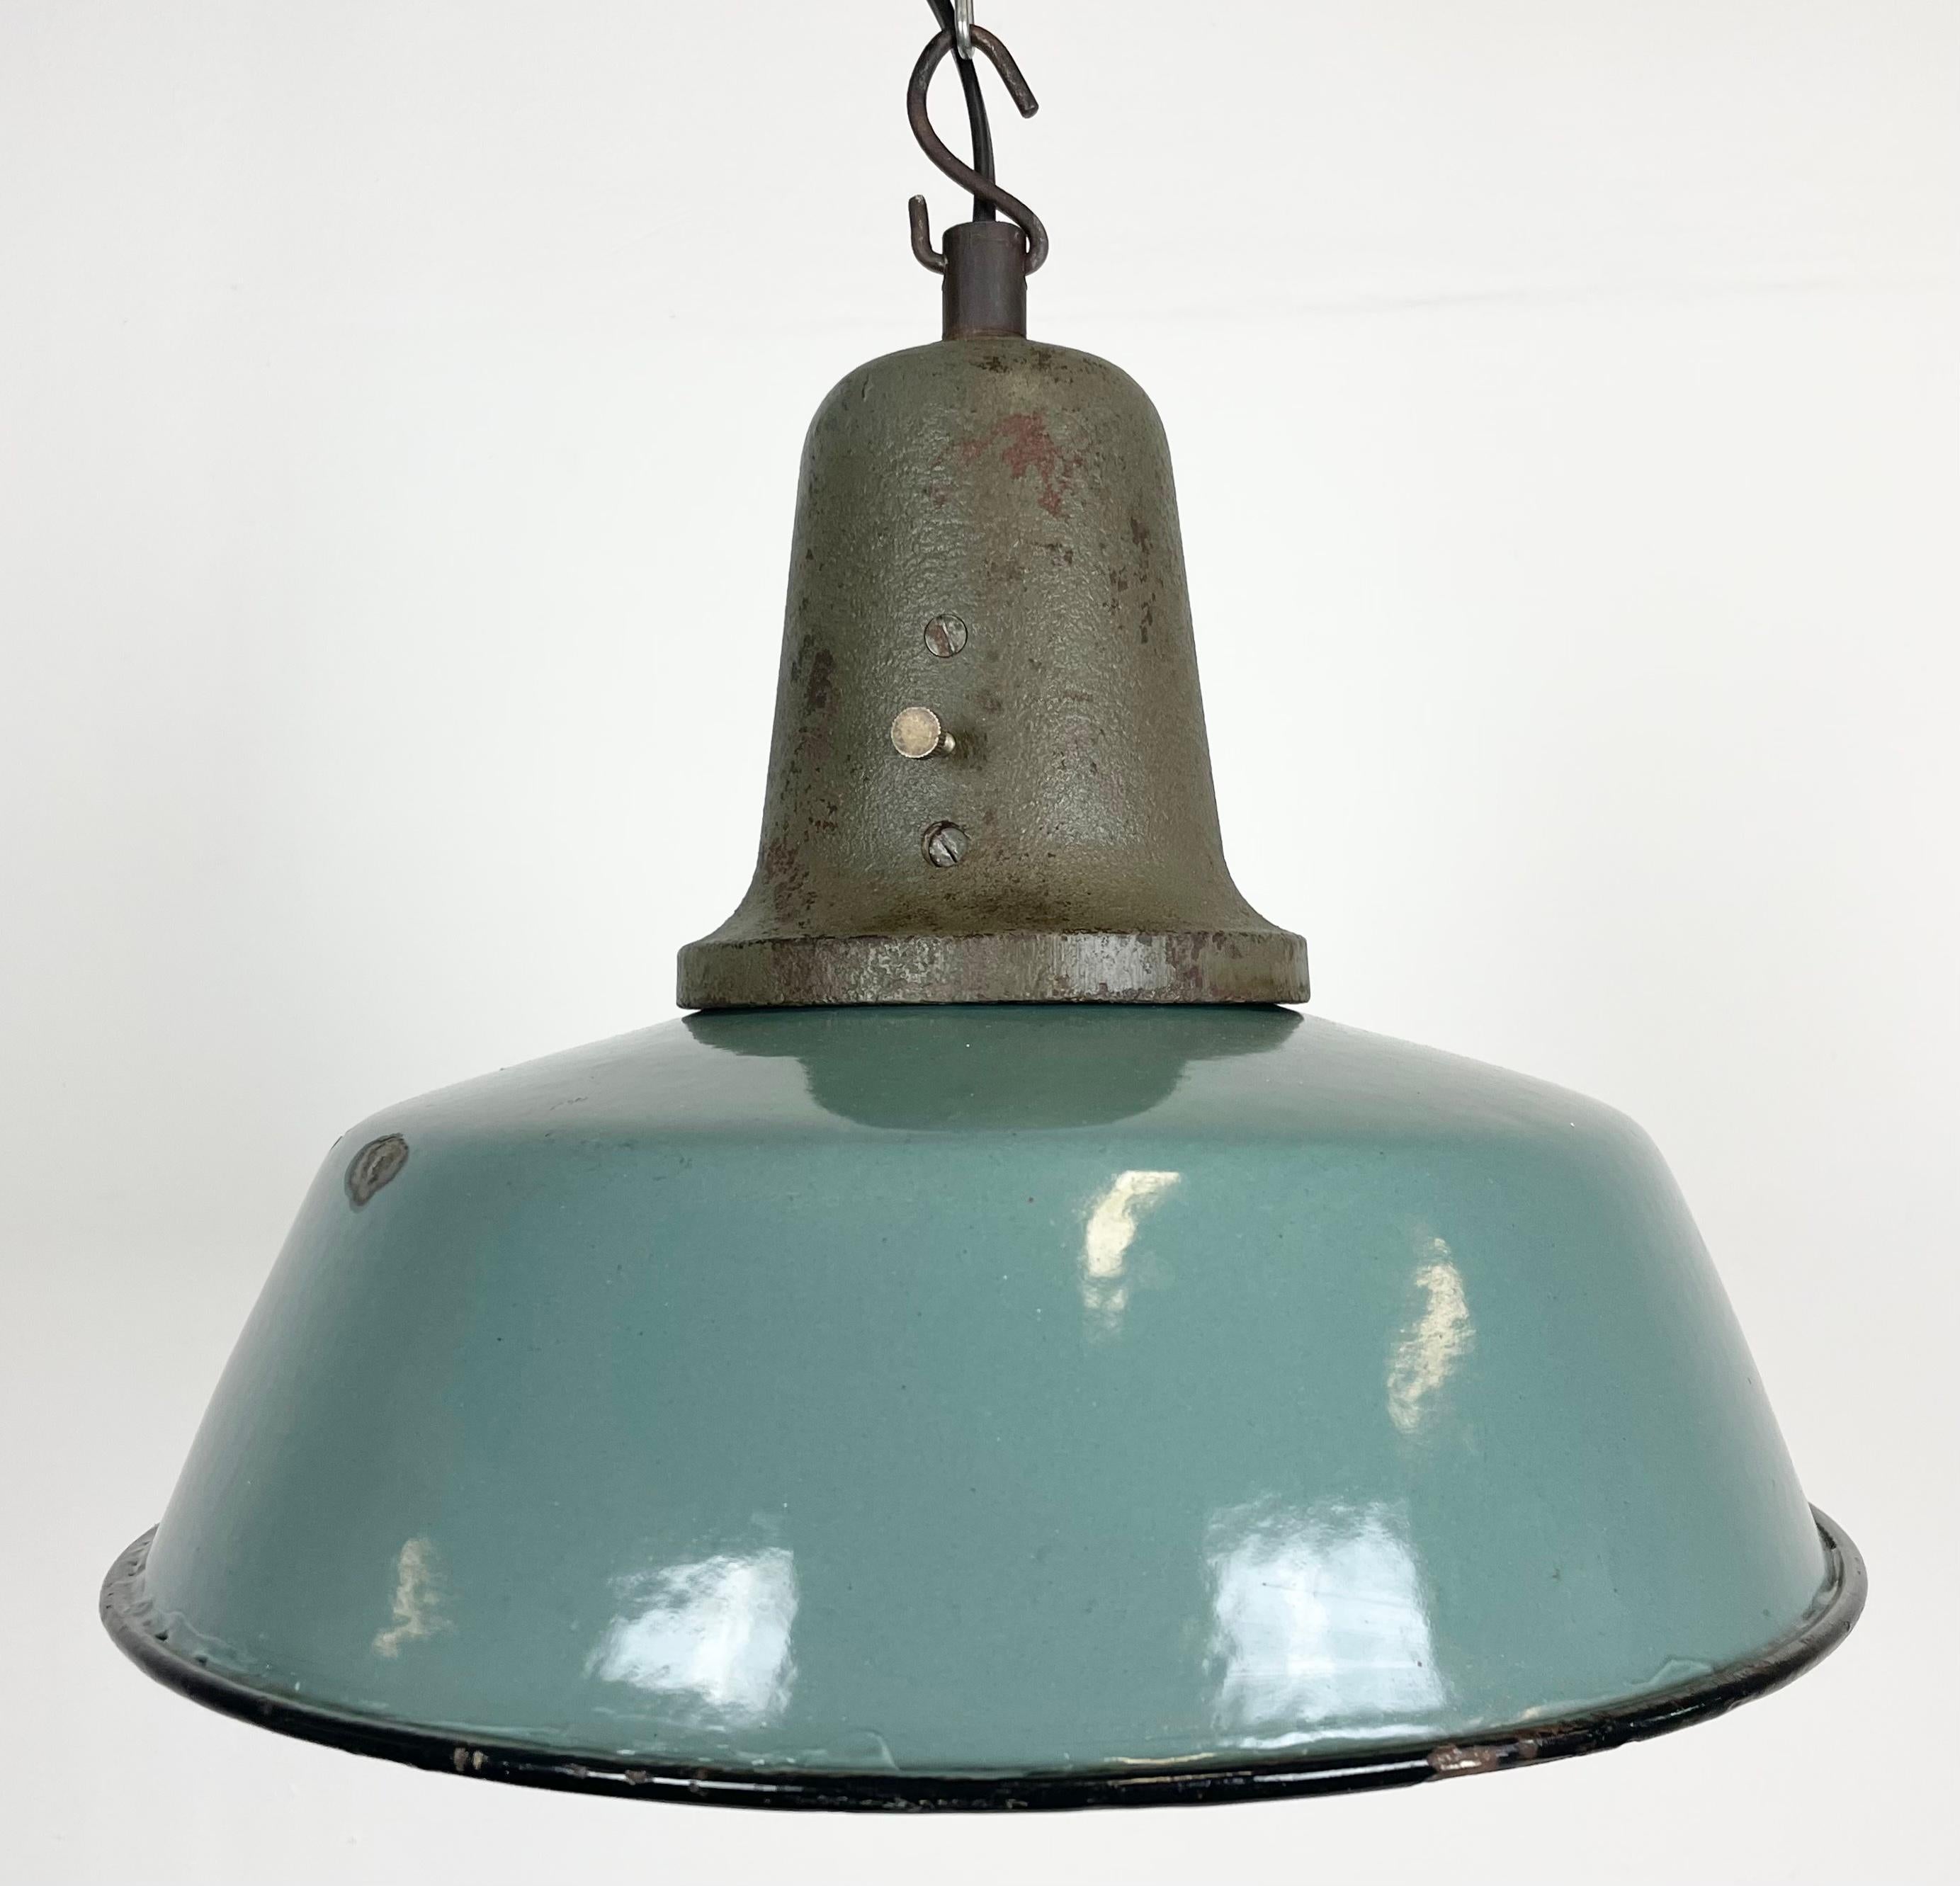 Industrial petrol enamel pendant light made in Poland during the 1960s. White enamel inside the shade. Cast iron top. The porcelain socket requires E 27/ E26 light bulbs. New wire. Fully functional. The weight of the lamp is 2,8 kg.